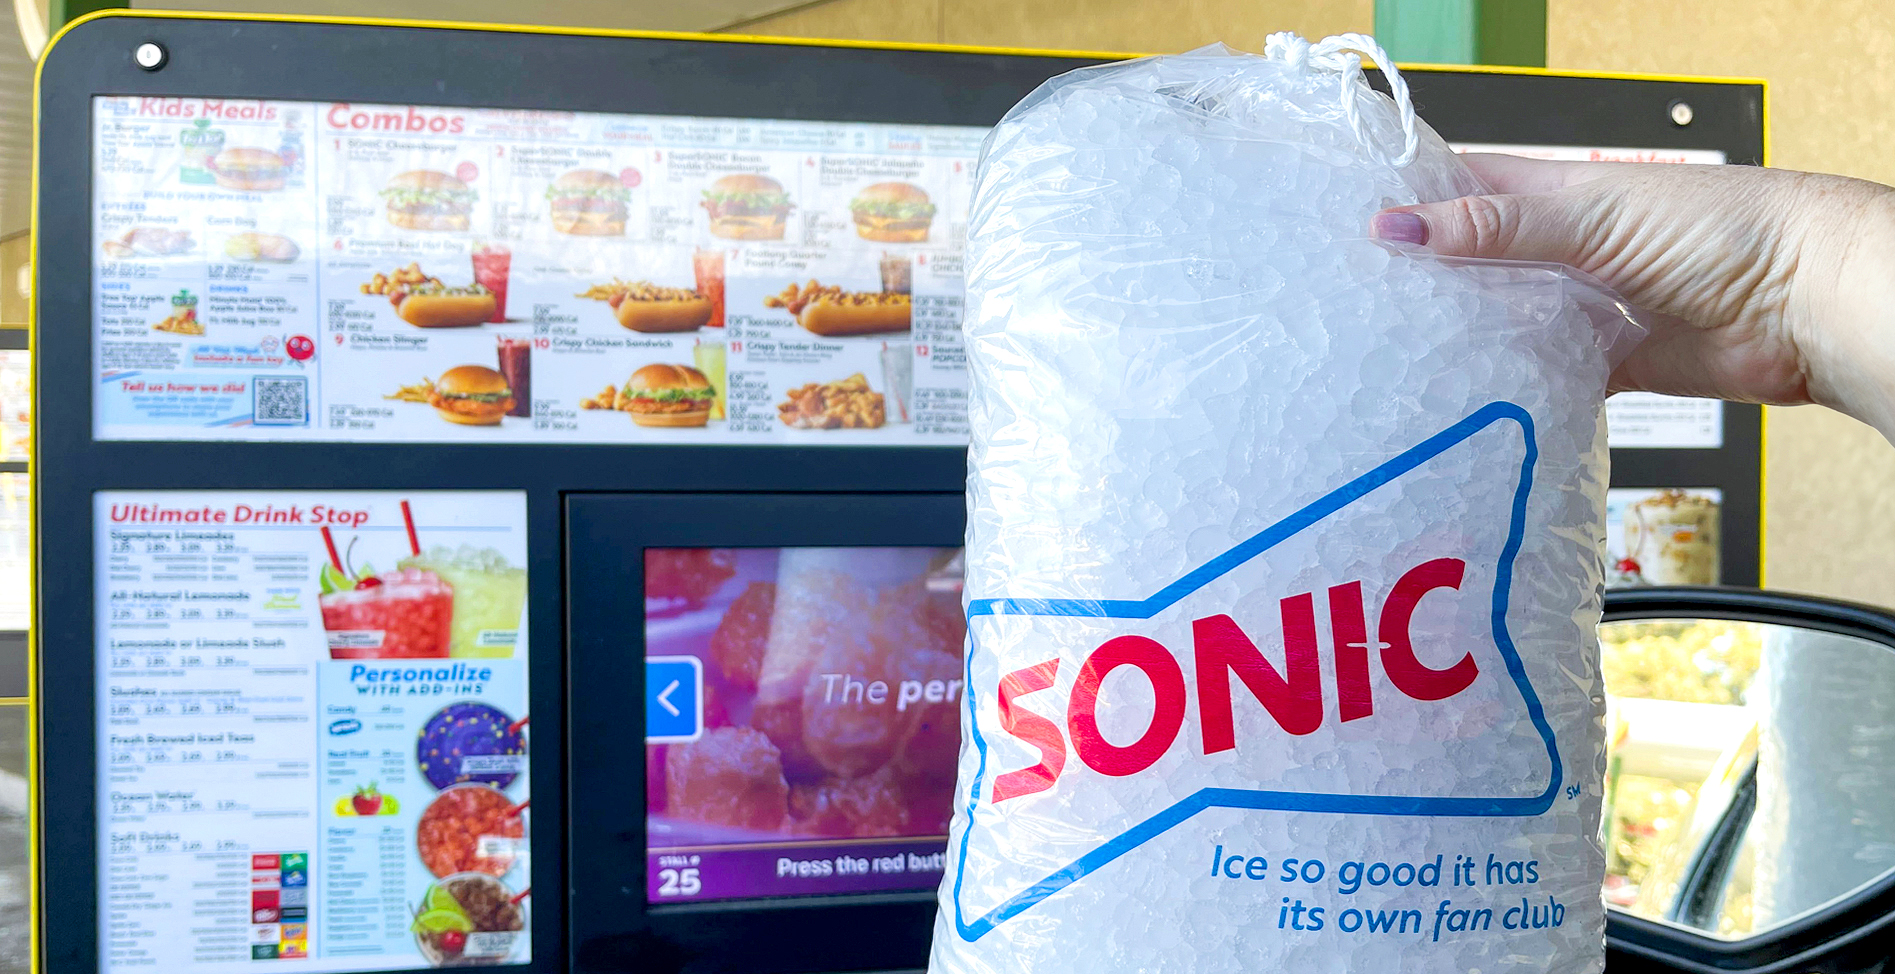 How much is a bag of ice at Sonic?